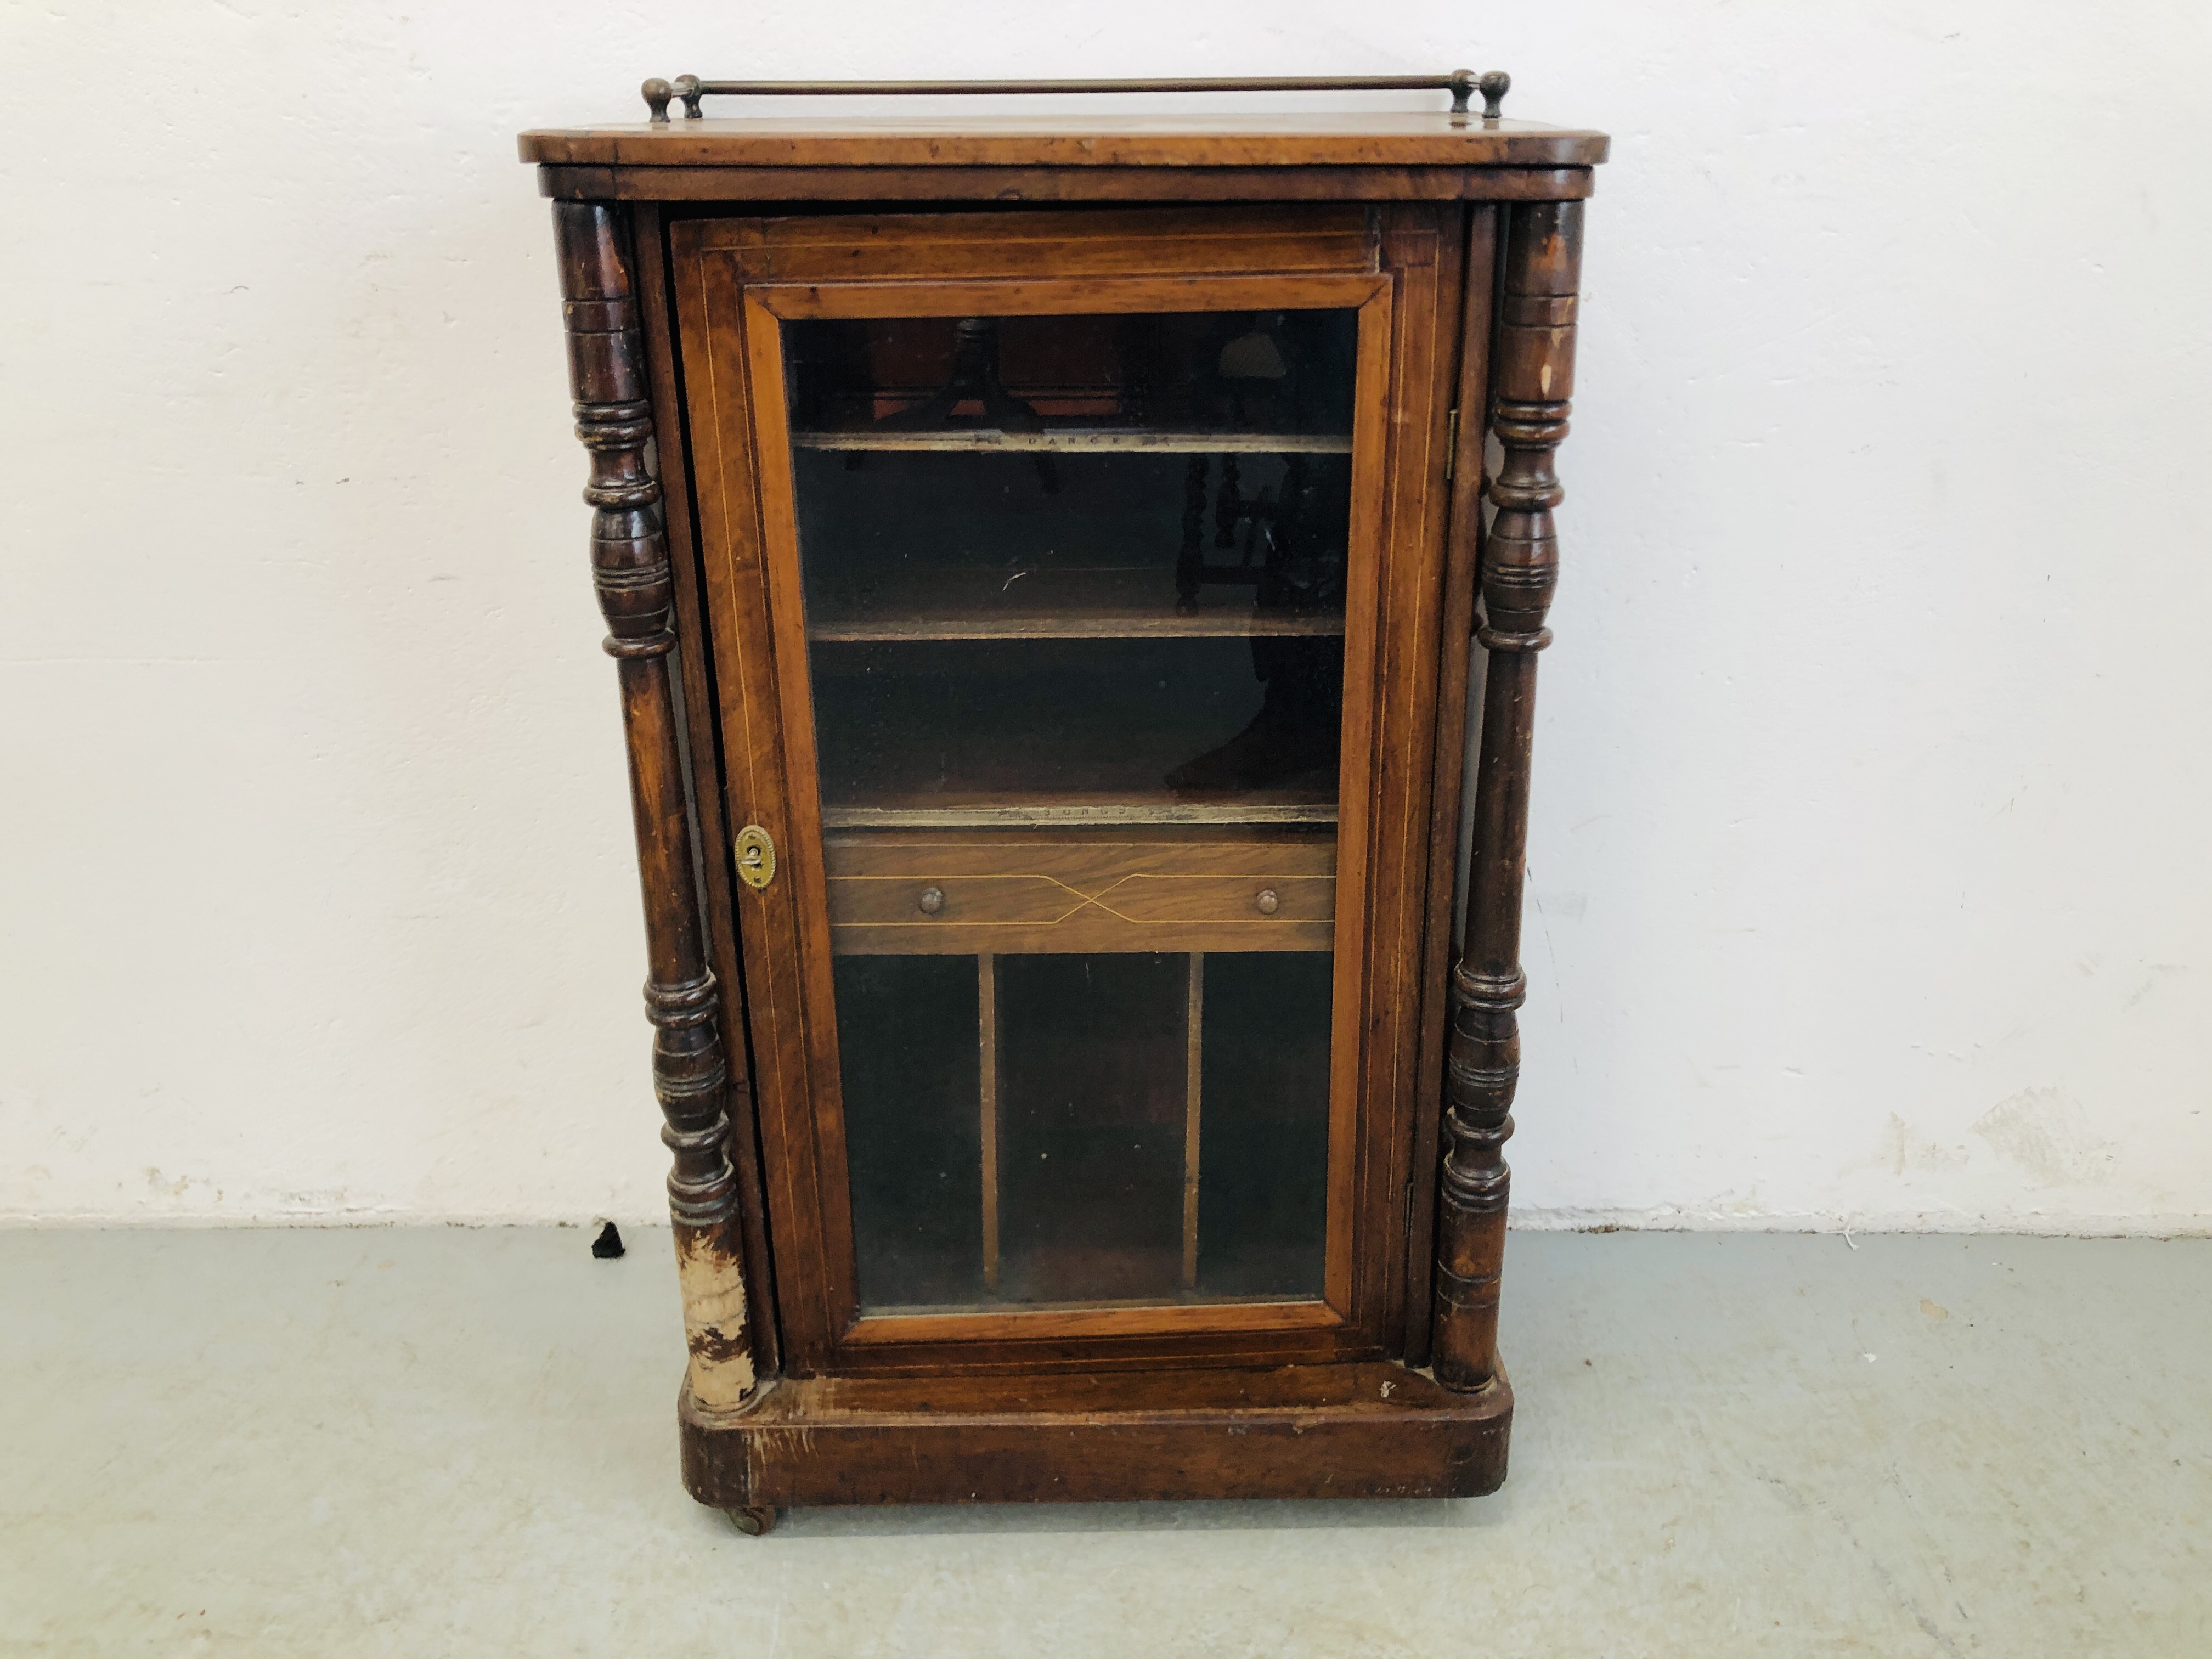 ANTIQUE VICTORIAN INLAID BURR WALNUT MUSIC CABINET WITH INTERIOR SINGLE DRAWER AND BRASS UPSTAND